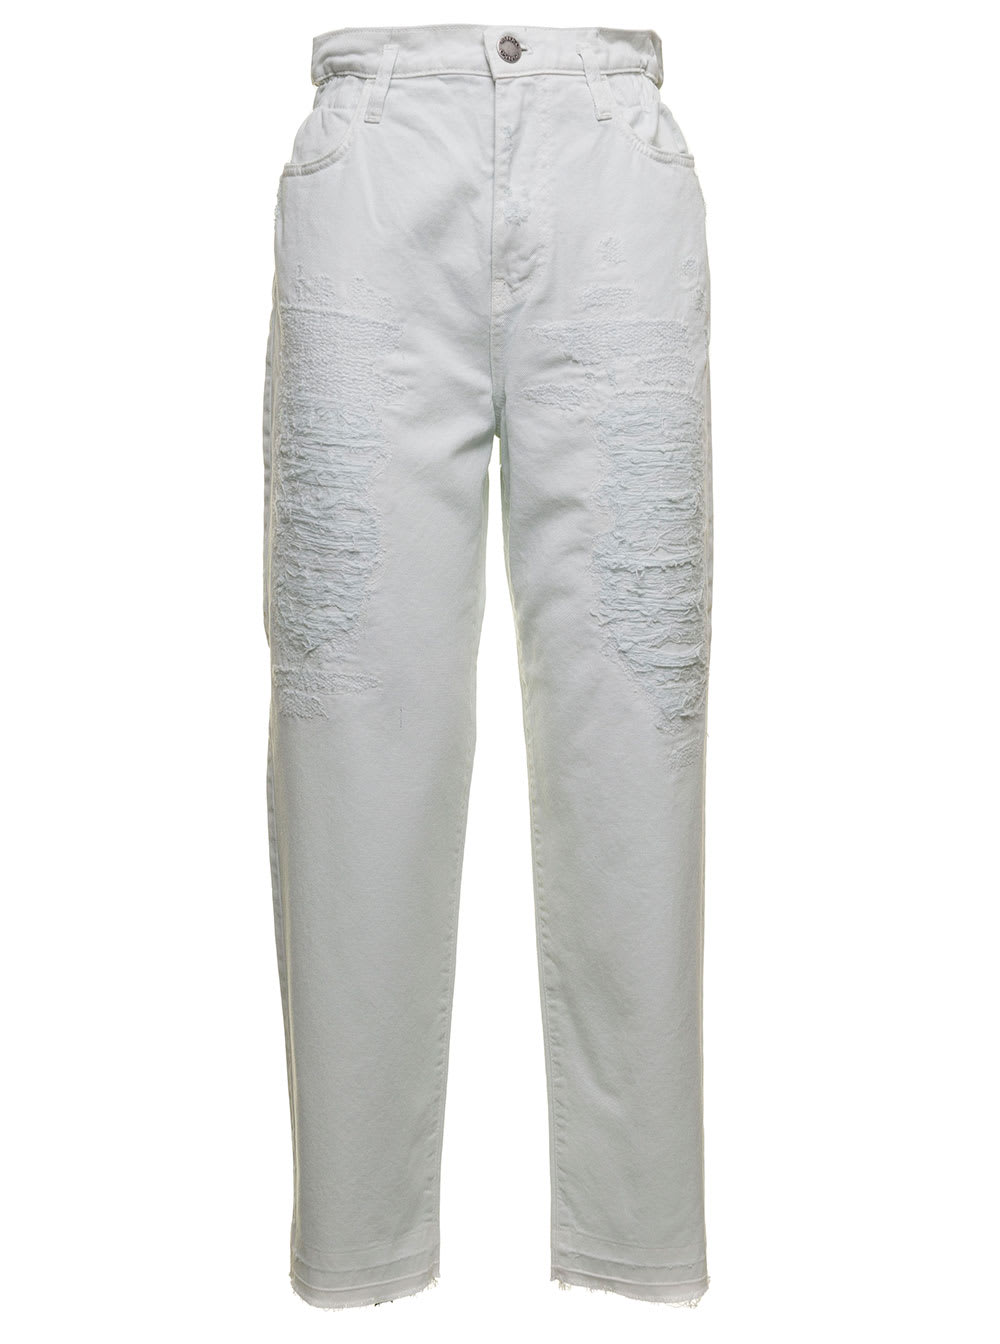 Pinko Womans White Denim Jeans With Ripped Inserts